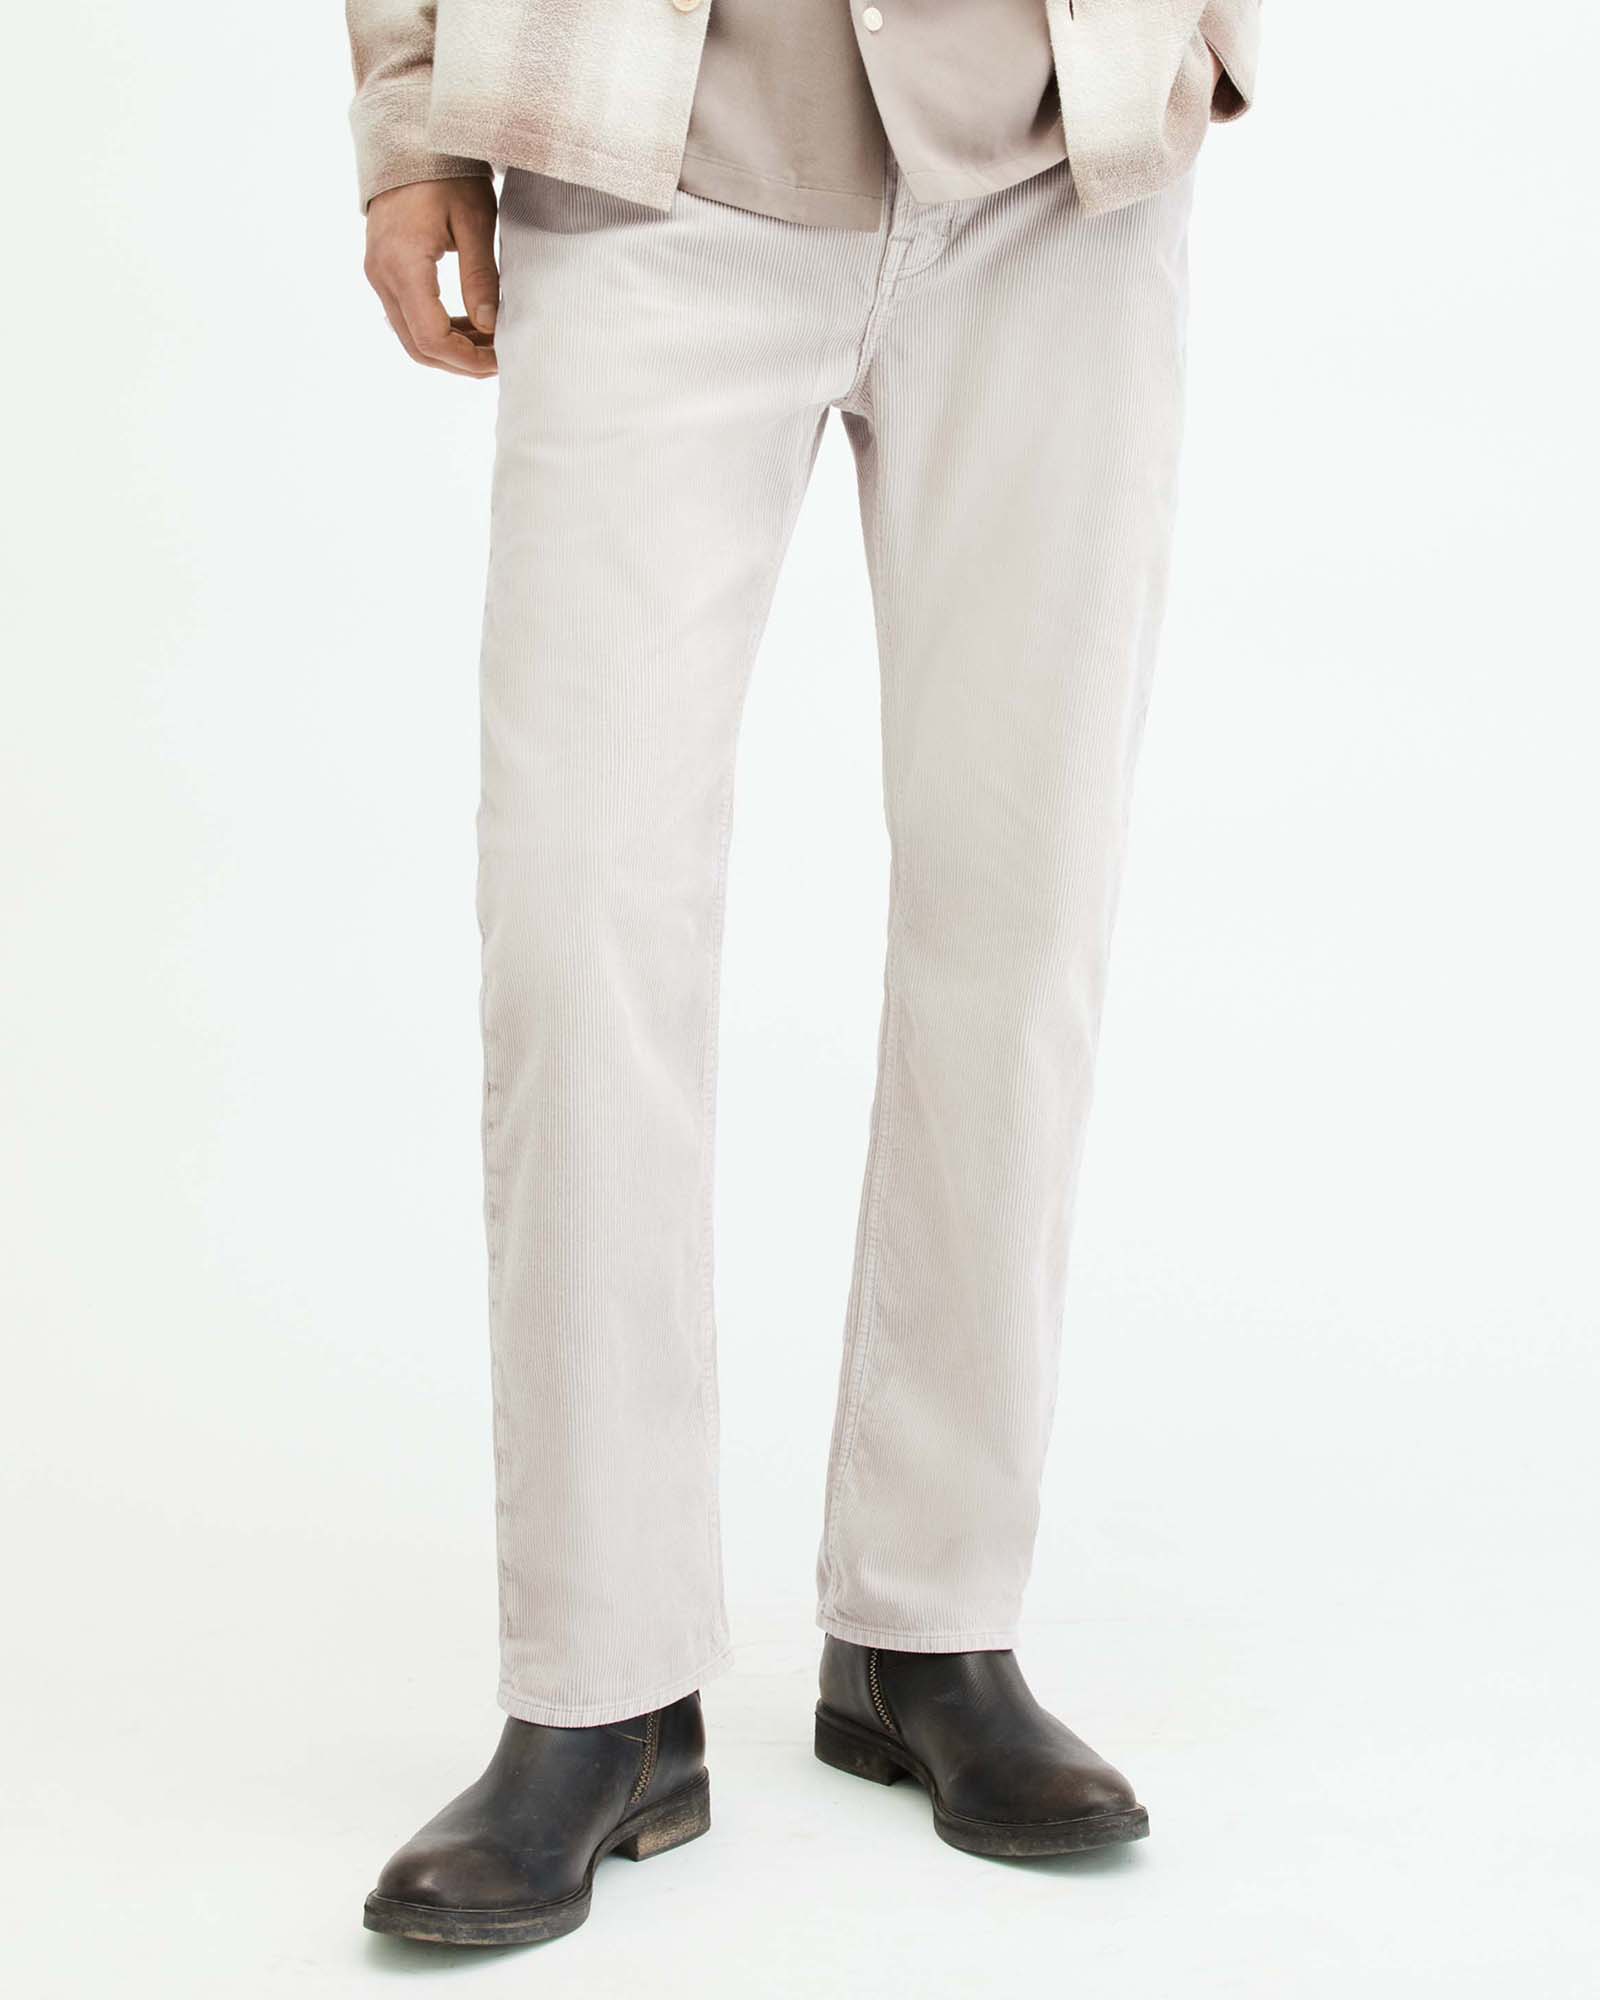 AllSaints Curtis Straight Fit Corduroy Jeans,, COOL GREY